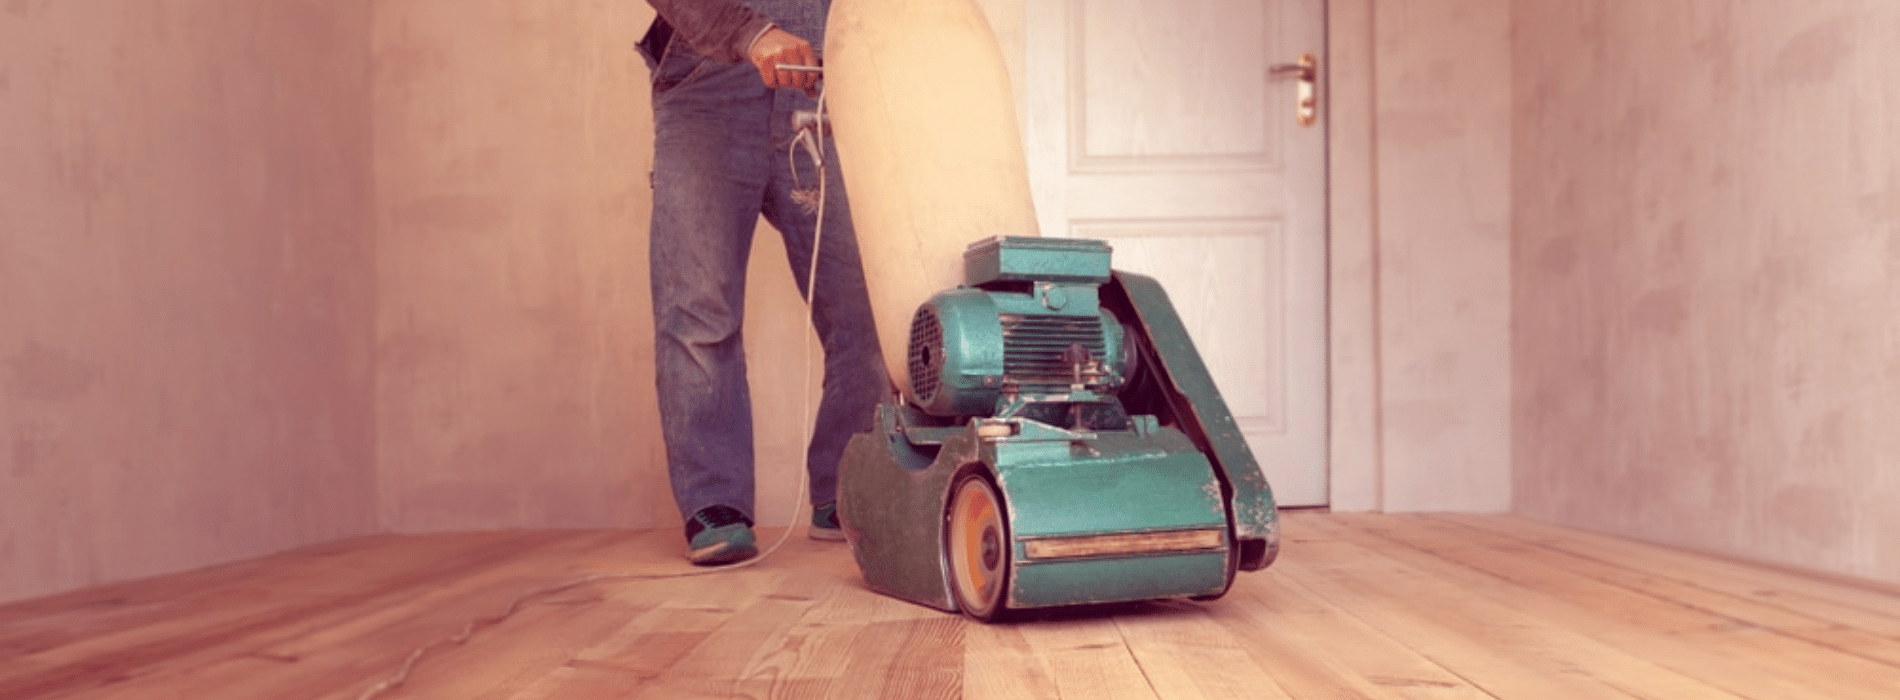 Mr Sander® in Whetstone, N20, using a 2200 effect, 230 voltage, 50 frequency, and 200x750 mm Bona belt sander for meticulous herringbone floor restoration. Equipped with a HEPA filter dust extraction system for clean, dust-free results.